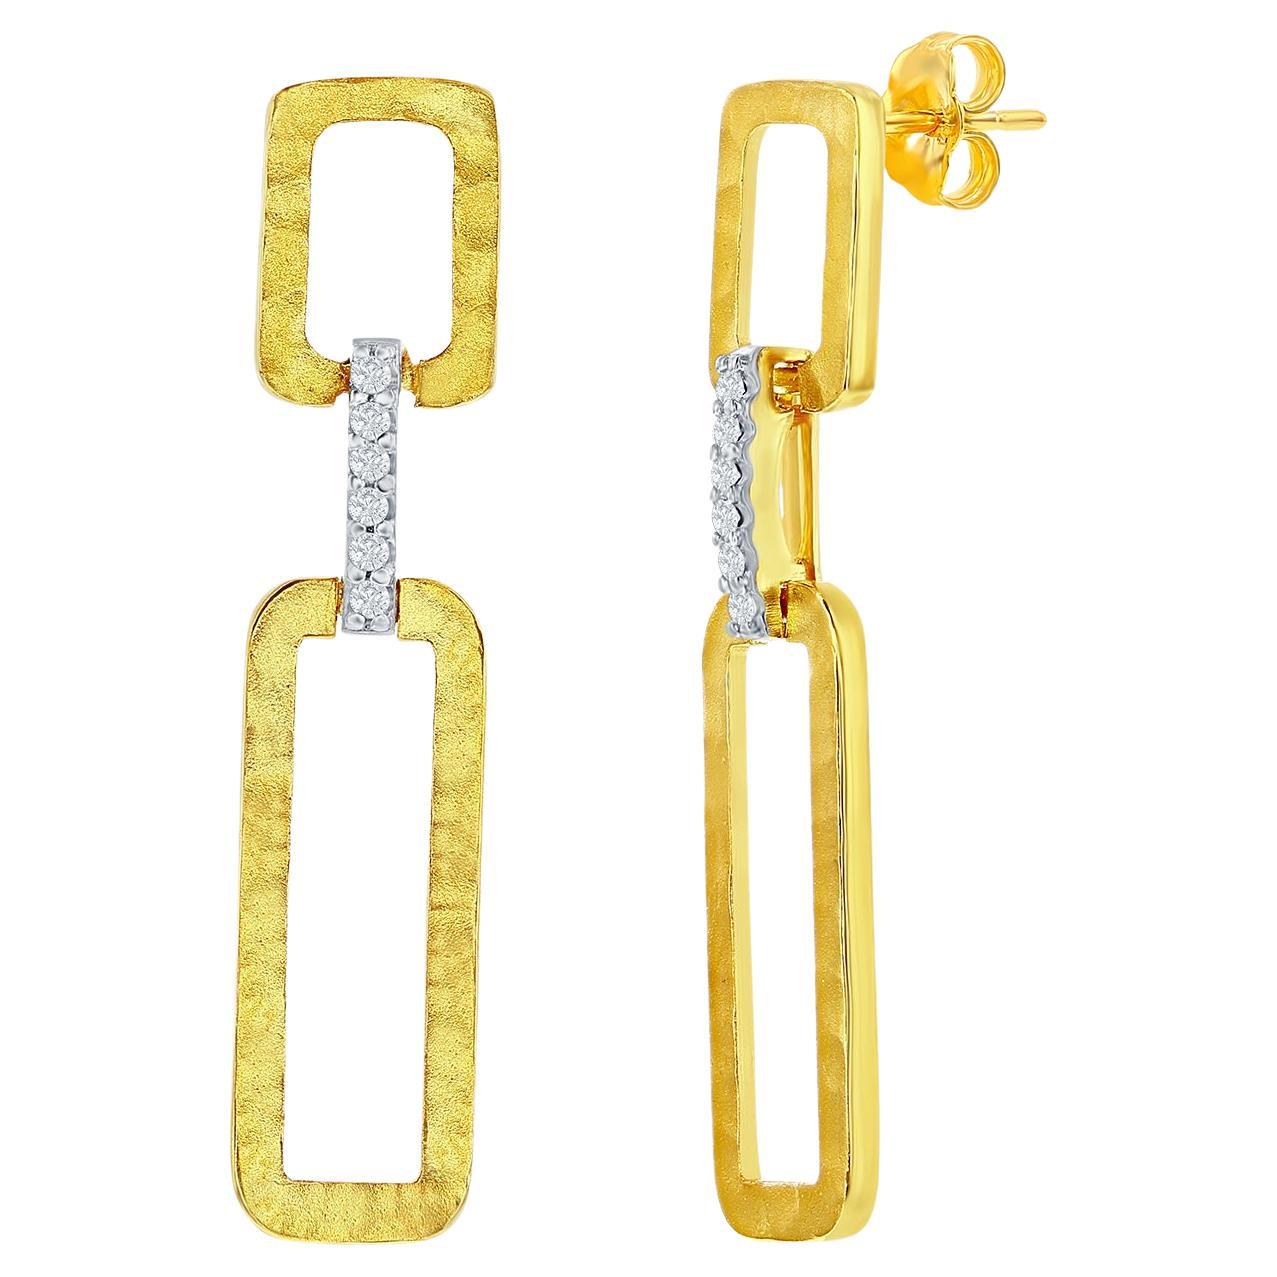 Hand-Crafted 14K Yellow Gold Dangling Open Rectangle-Shaped Link Earrings